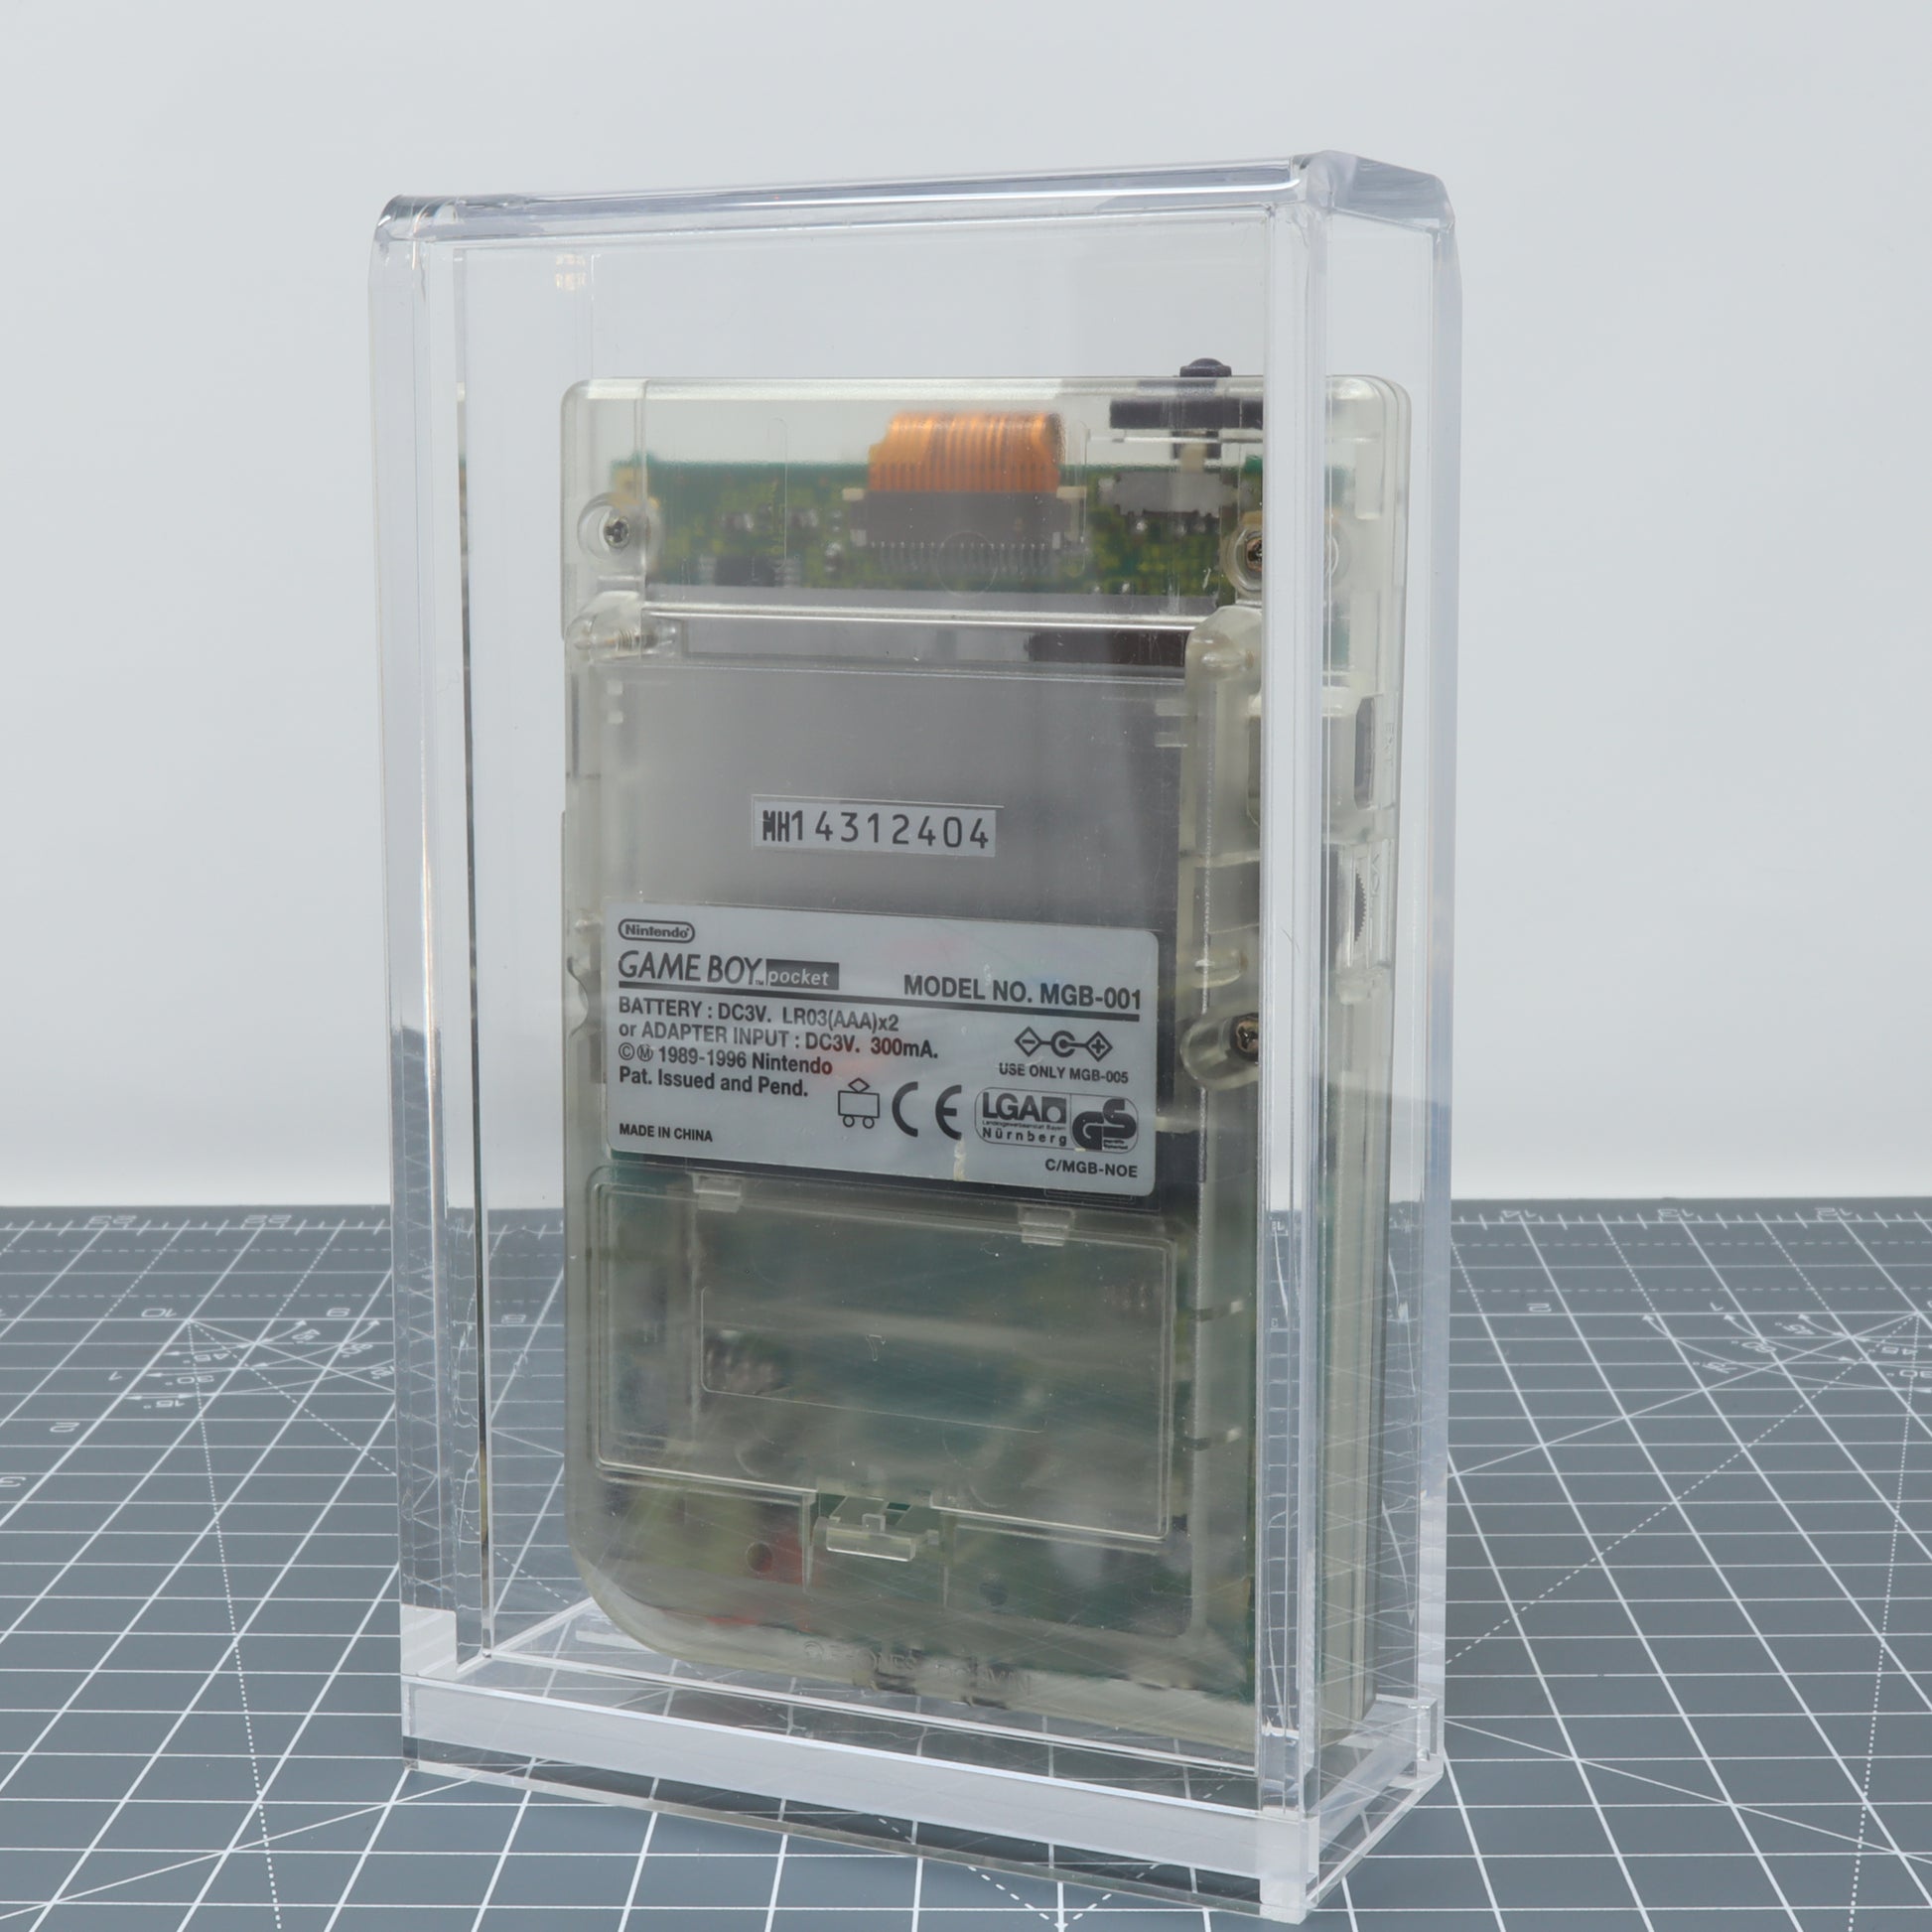 Transparent Game Boy Pocket encapsulated in a clear acrylic display capsule, displayed on a grid background.